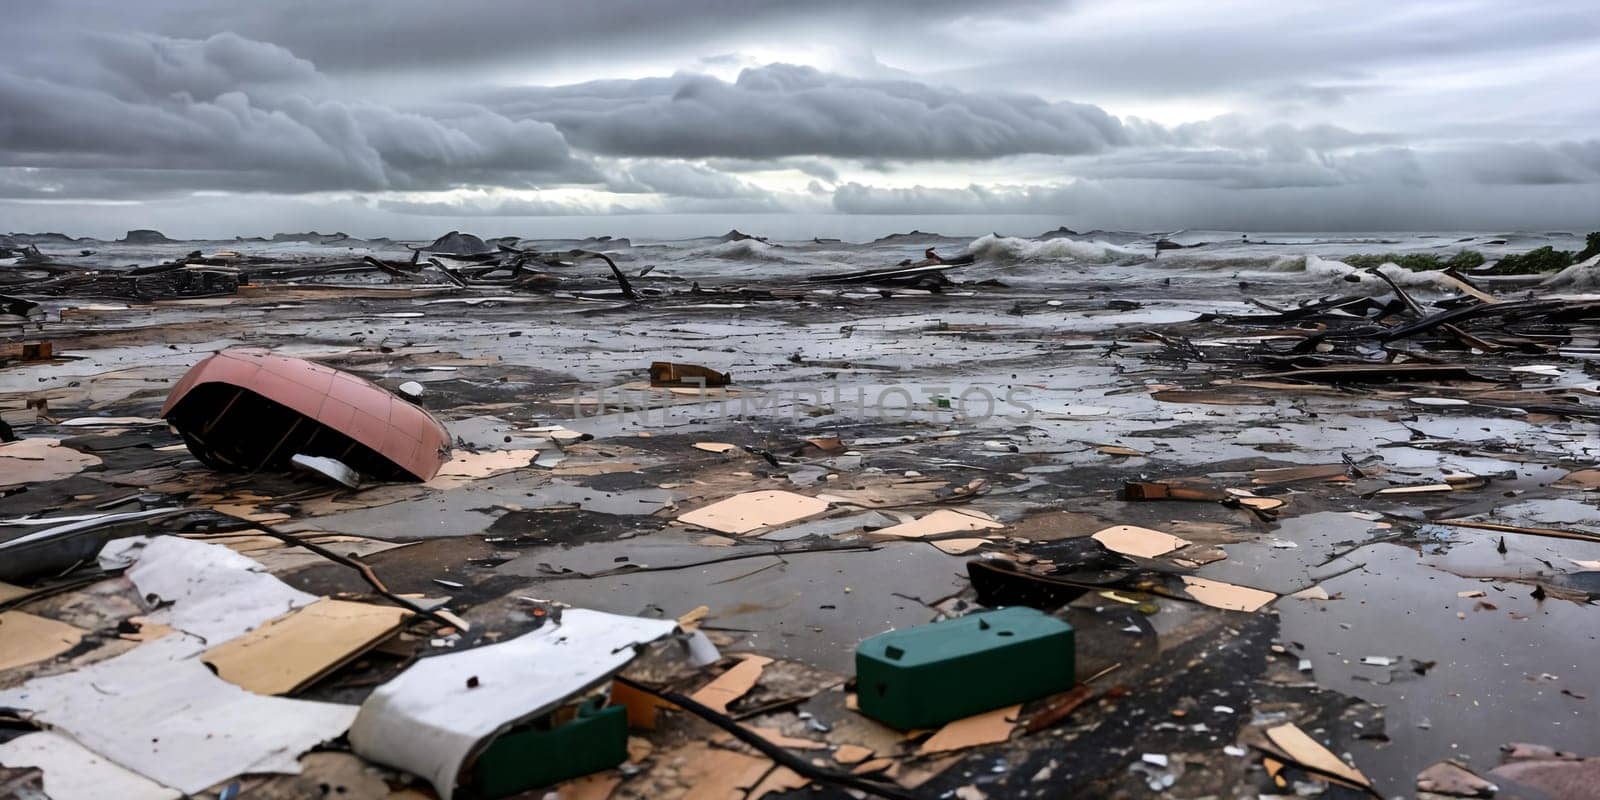 The aftermath of a powerful tsunami with debris scattered across a coastal area, emphasizing the sheer scale of destruction caused by the relentless waves. Panorama